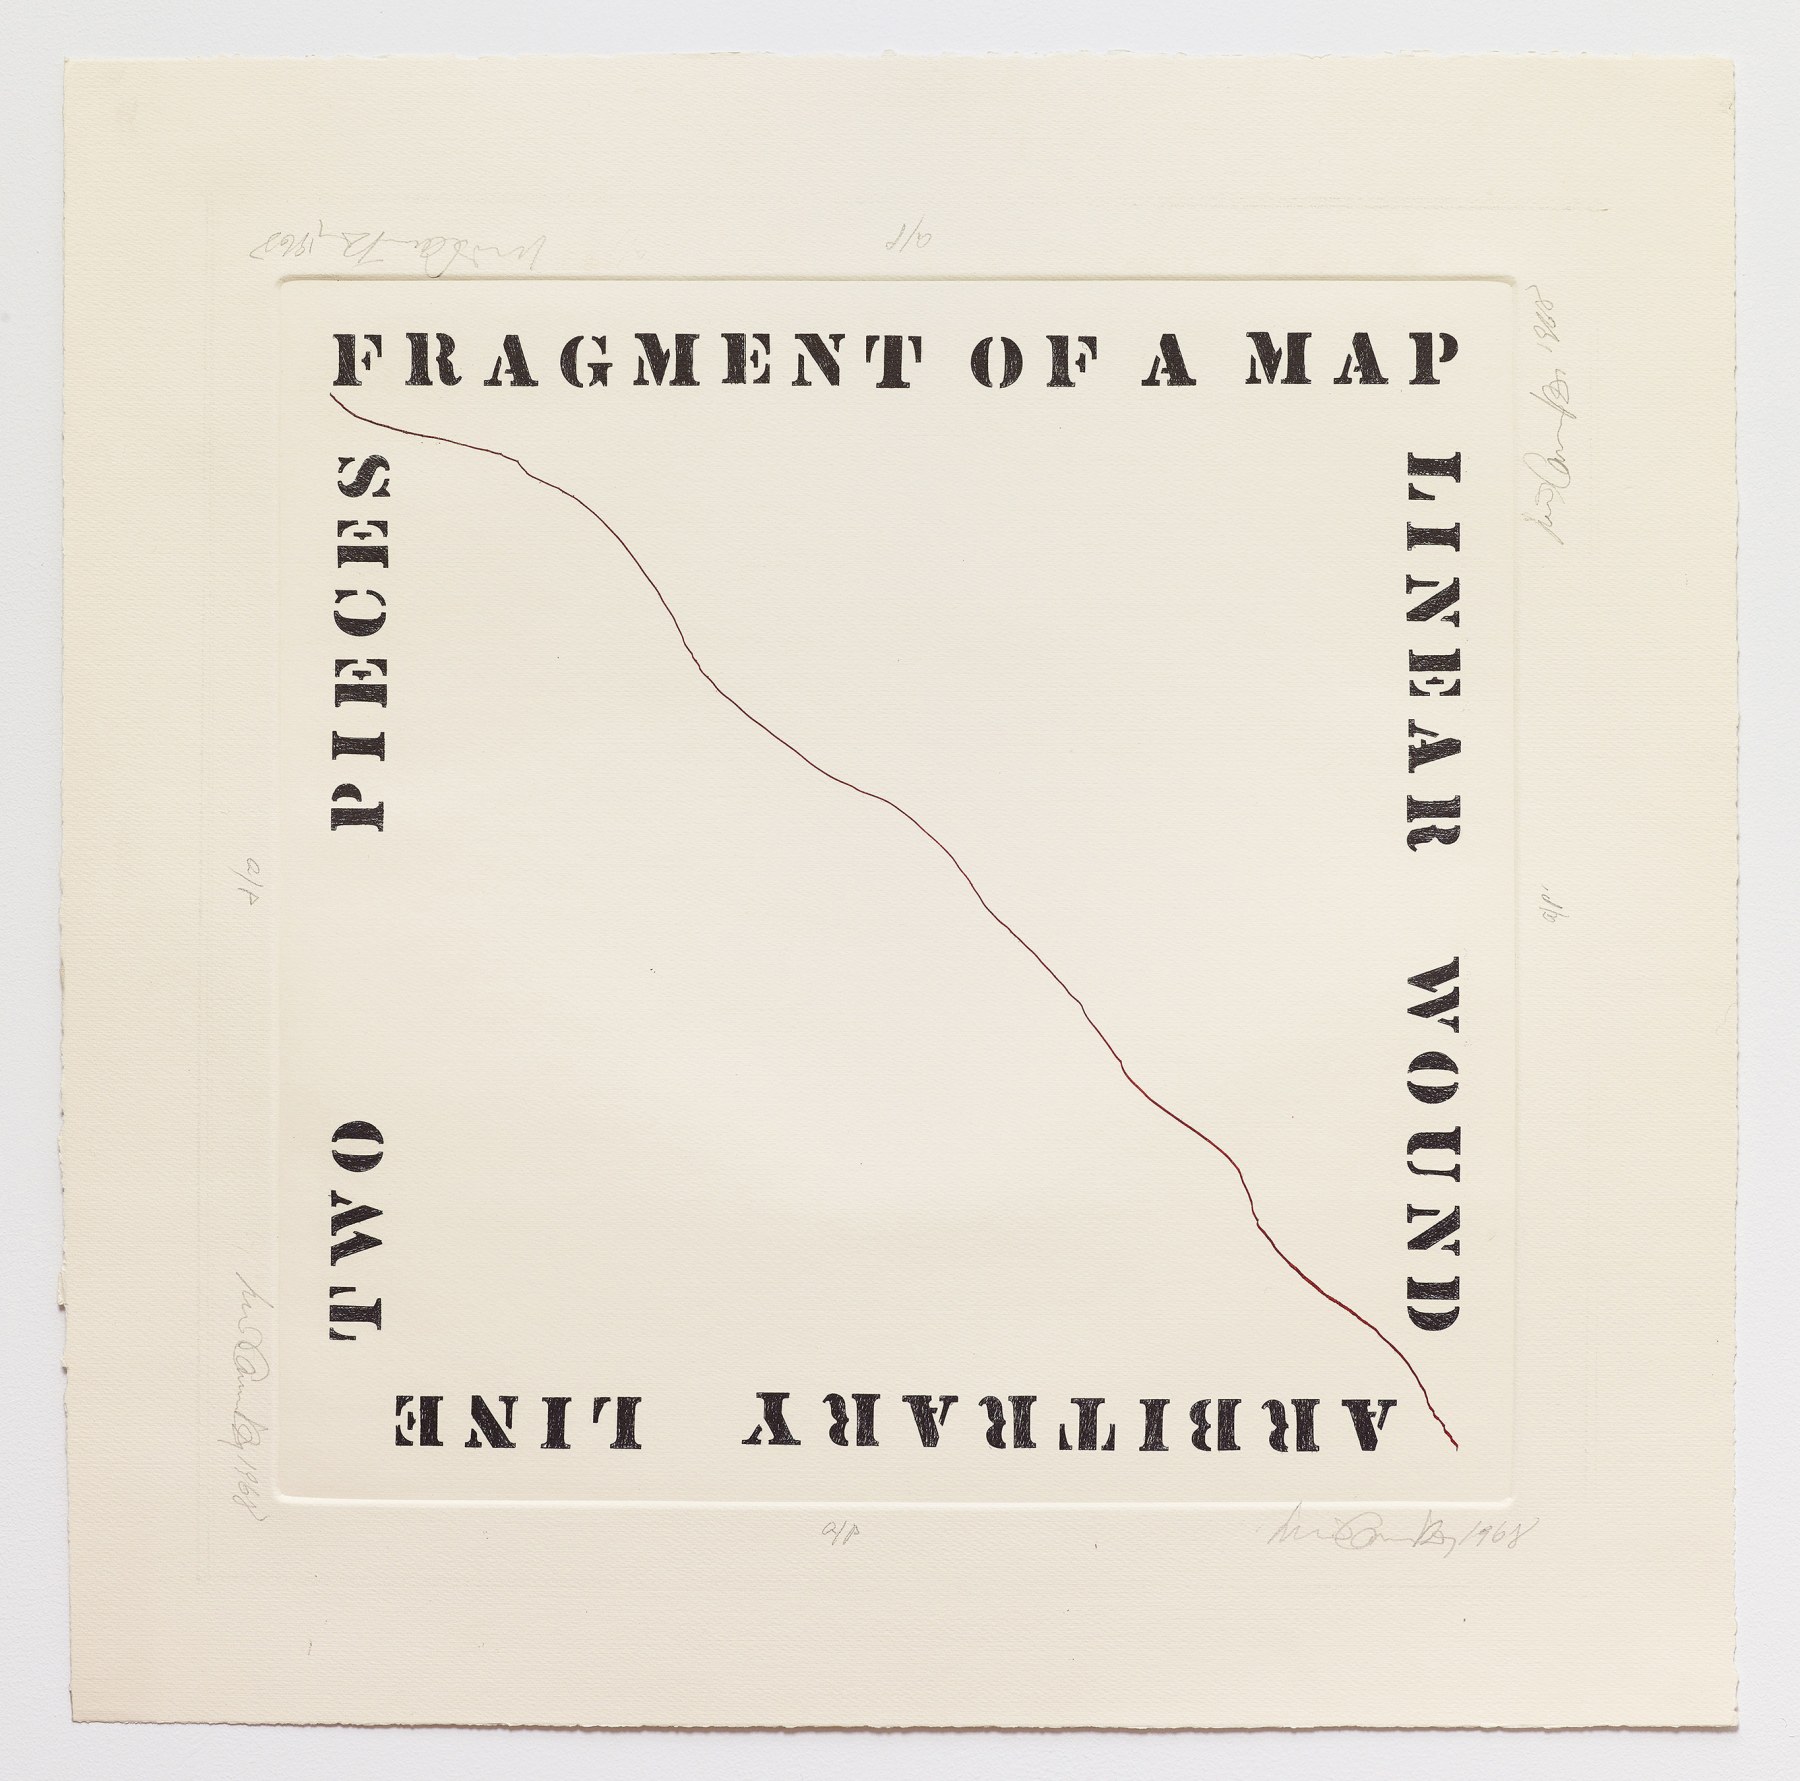 Luis Camnitzer, Fragment of a Map, 1968